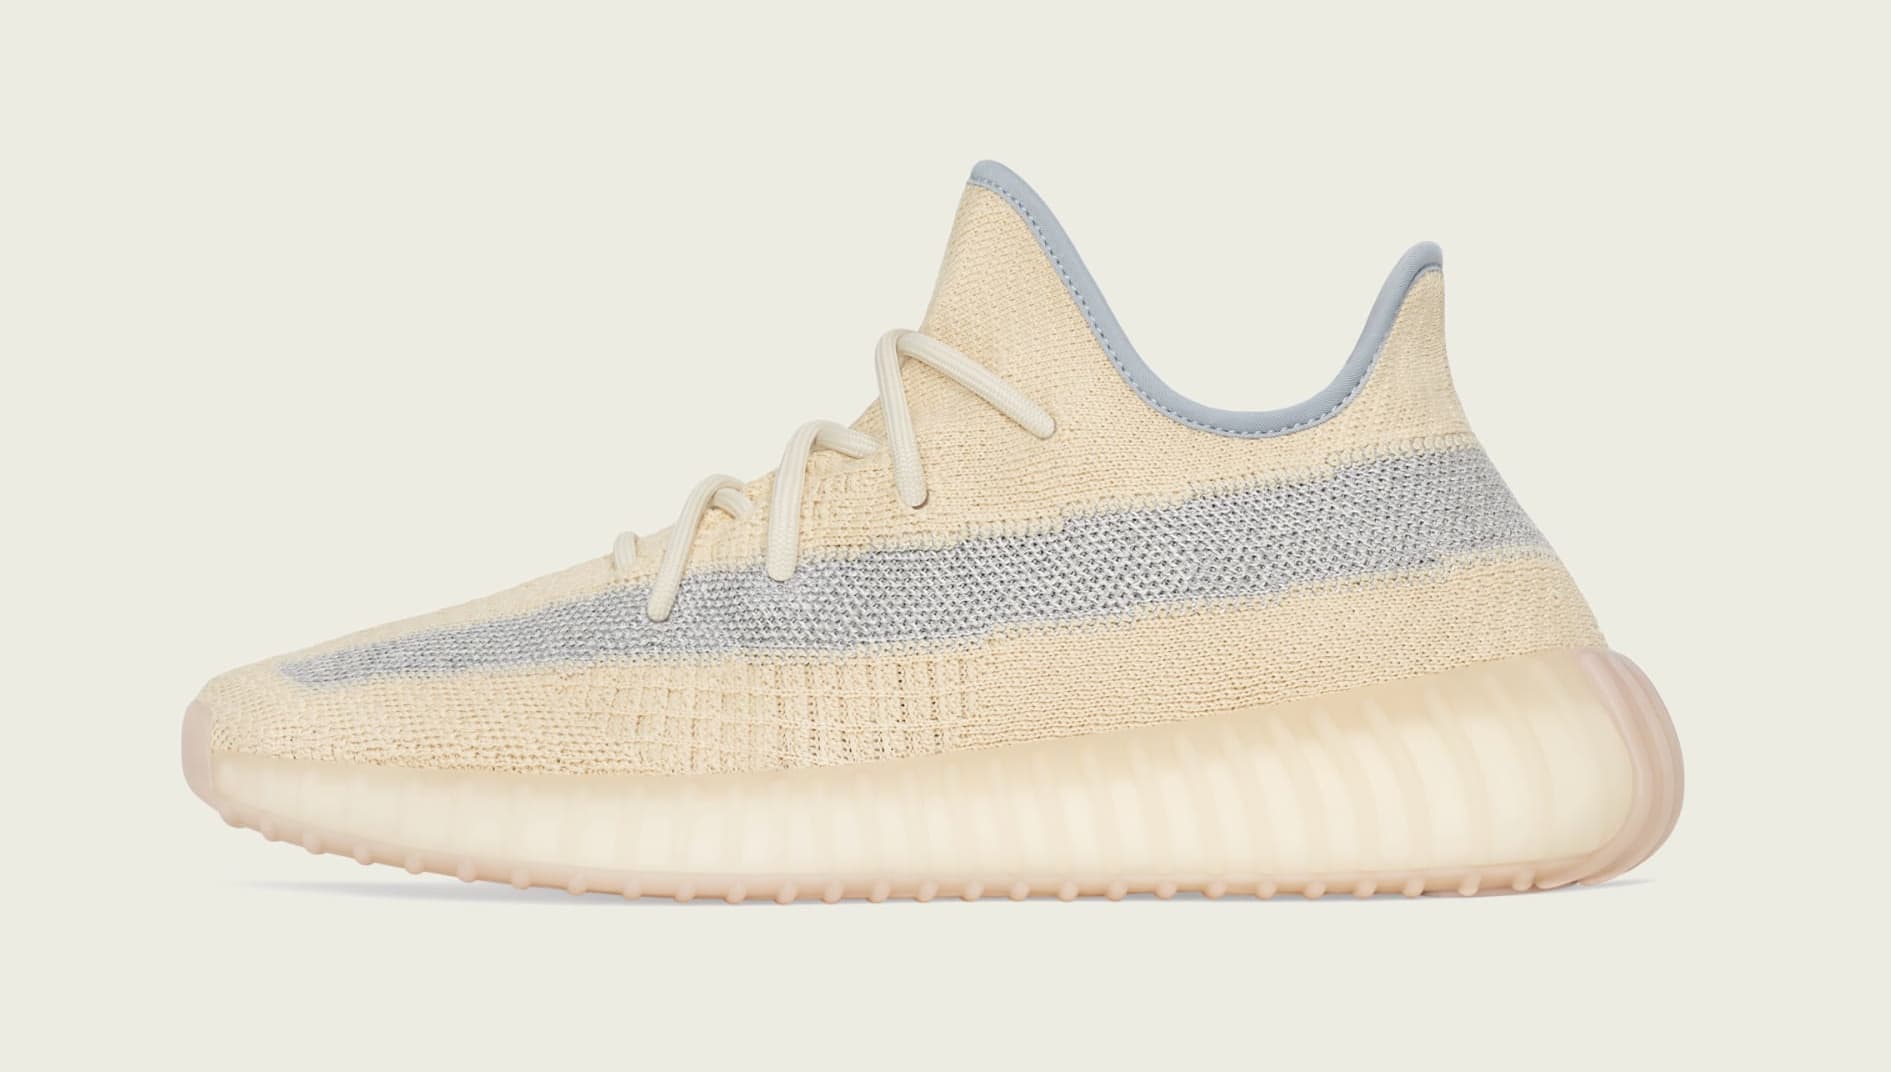 Adidas Yeezy Boost 350 V2 &#x27;Linen&#x27; FY5158 Lateral